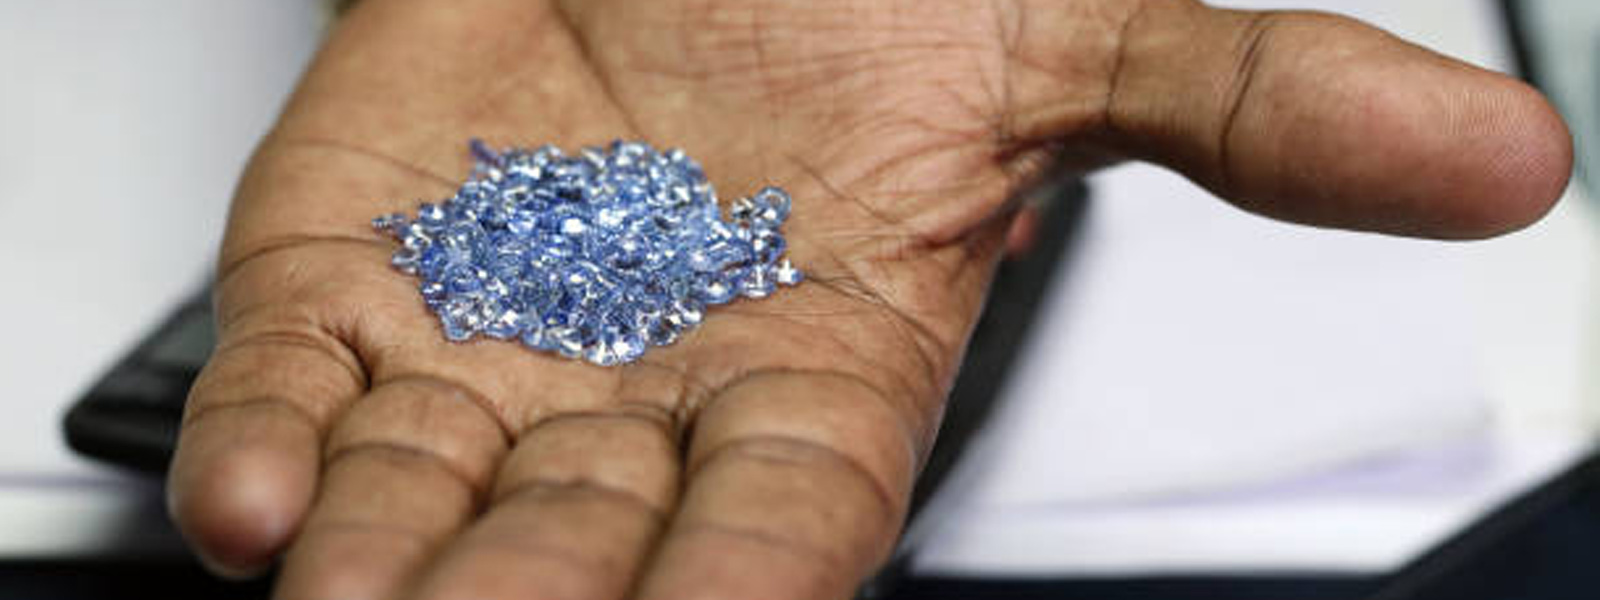 Gem thief from Panadura to be brought before court